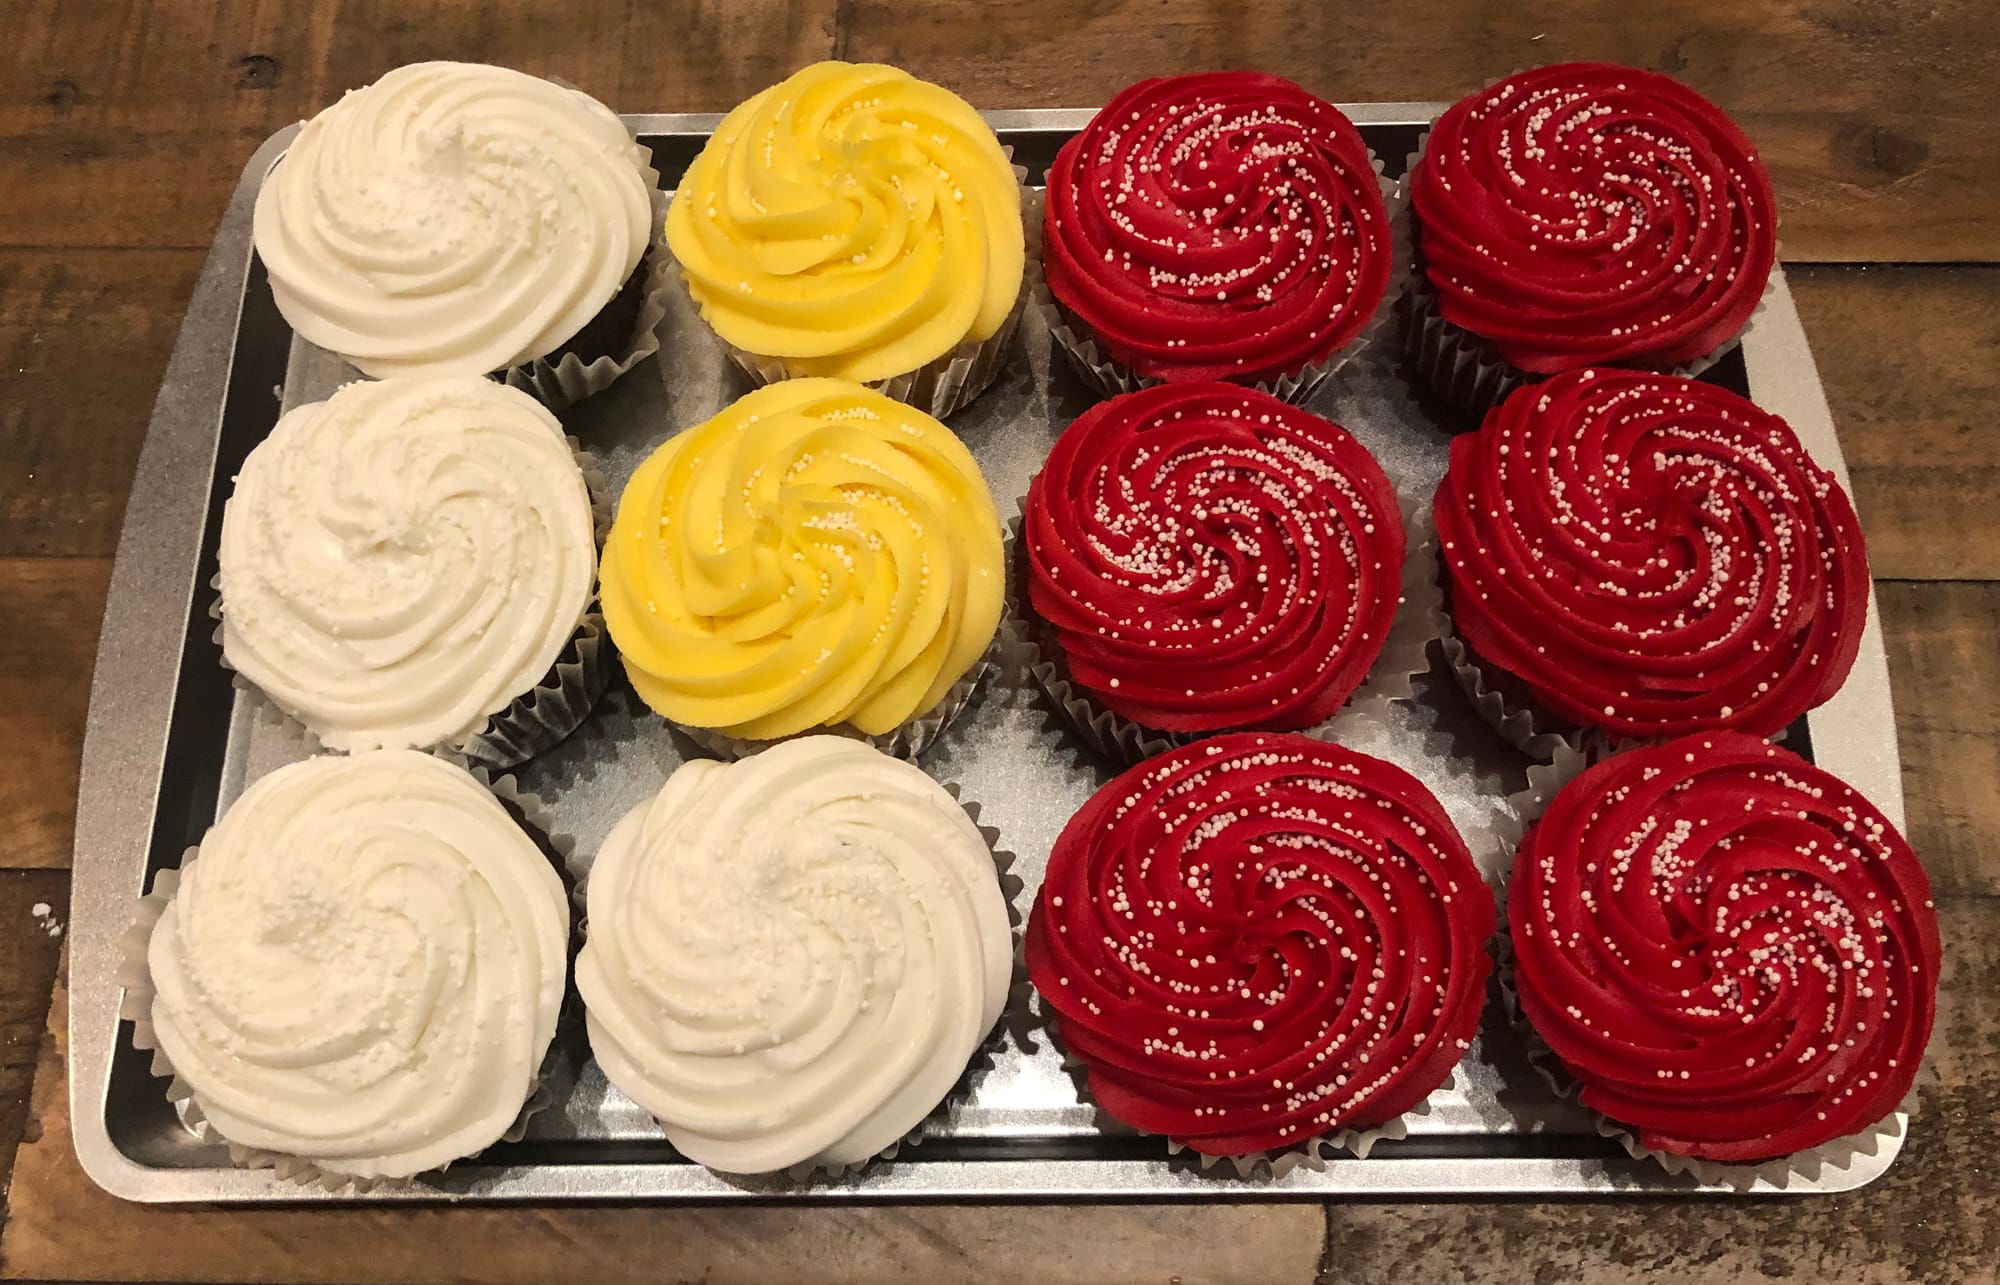 Chocolate, Vanilla, and Red Velvet Cupcakes With Buttercream Frosting